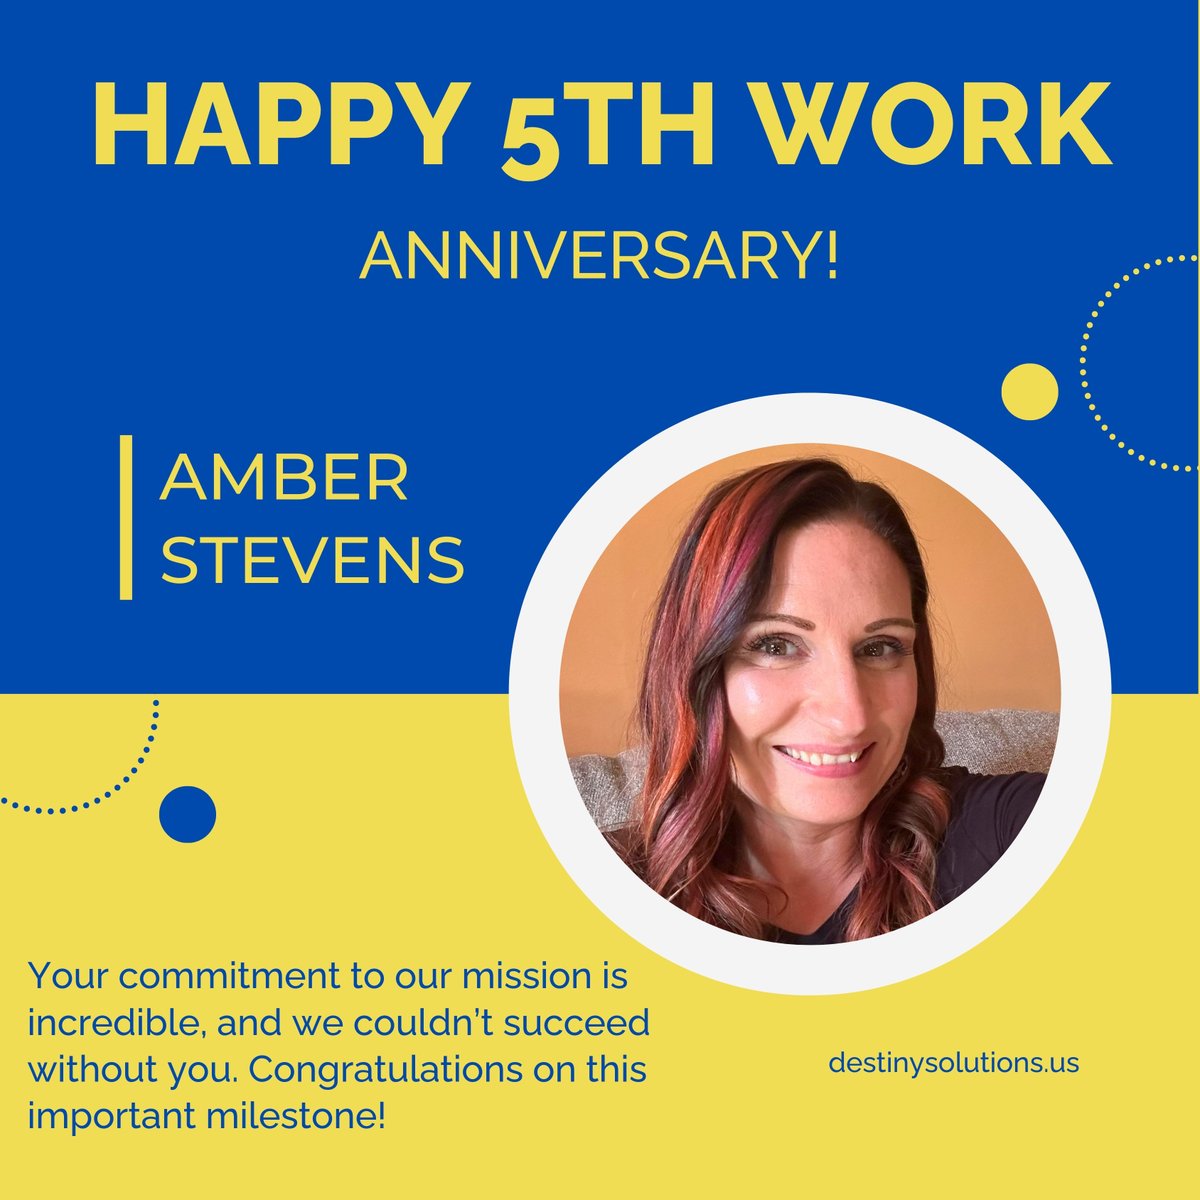 Huge shoutout to Amber on her 5-year work anniversary! 🎉🎊 
 
Amber, your commitment shines through in everything you do. We're so grateful to have you on the team. Cheers to 5 fantastic years!

#DestinySolutions #OneStopTelecomShop #workanniversary #employeeappreciation